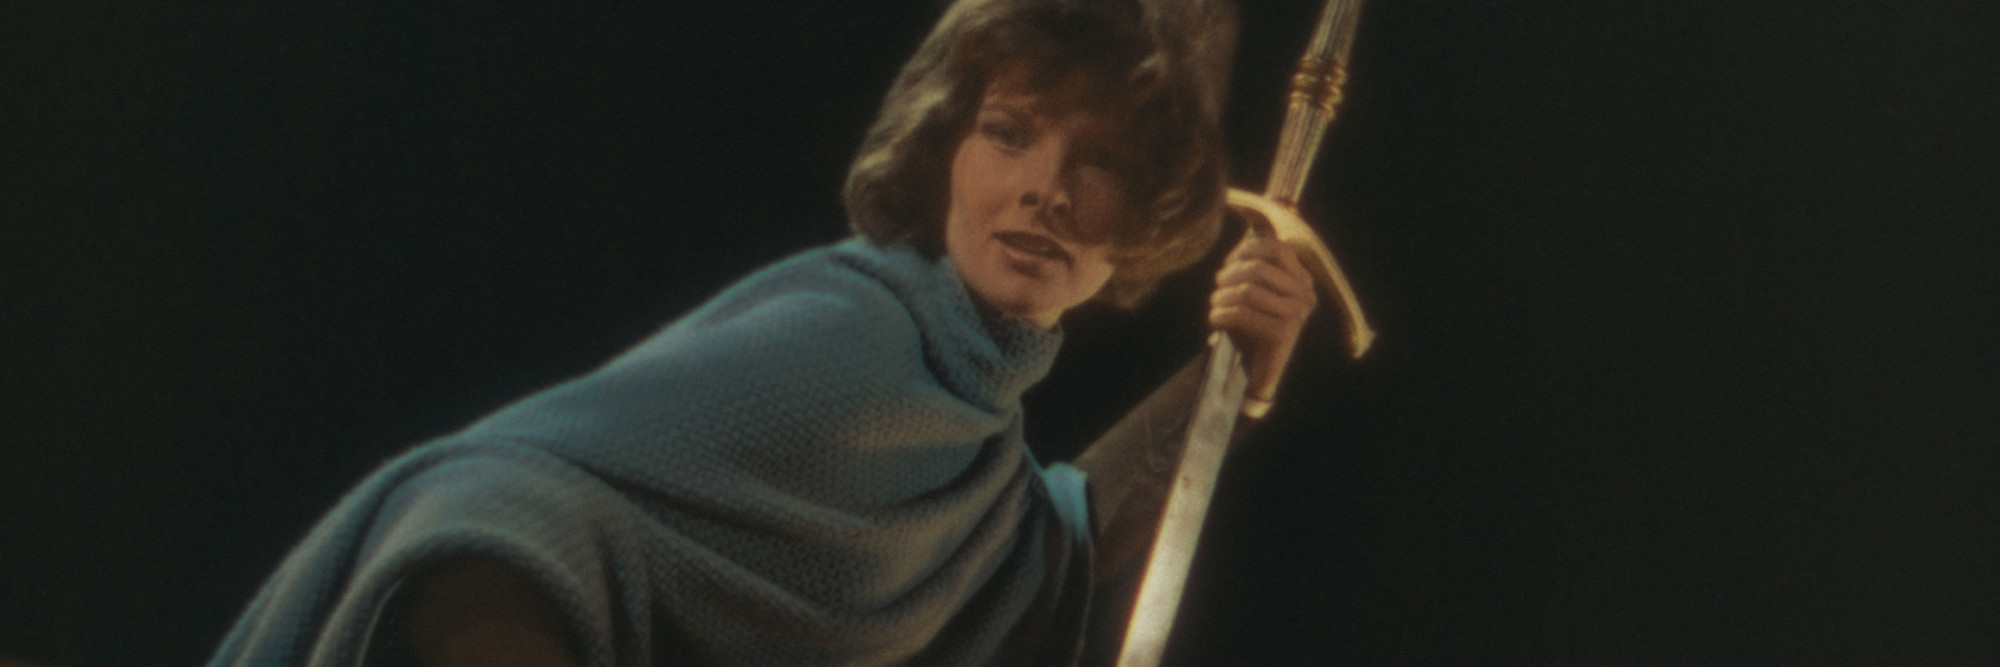 Joan of Arc [Screen Test. Katharine Hepburn]. 1934. USA. Produced by Pioneer Pictures